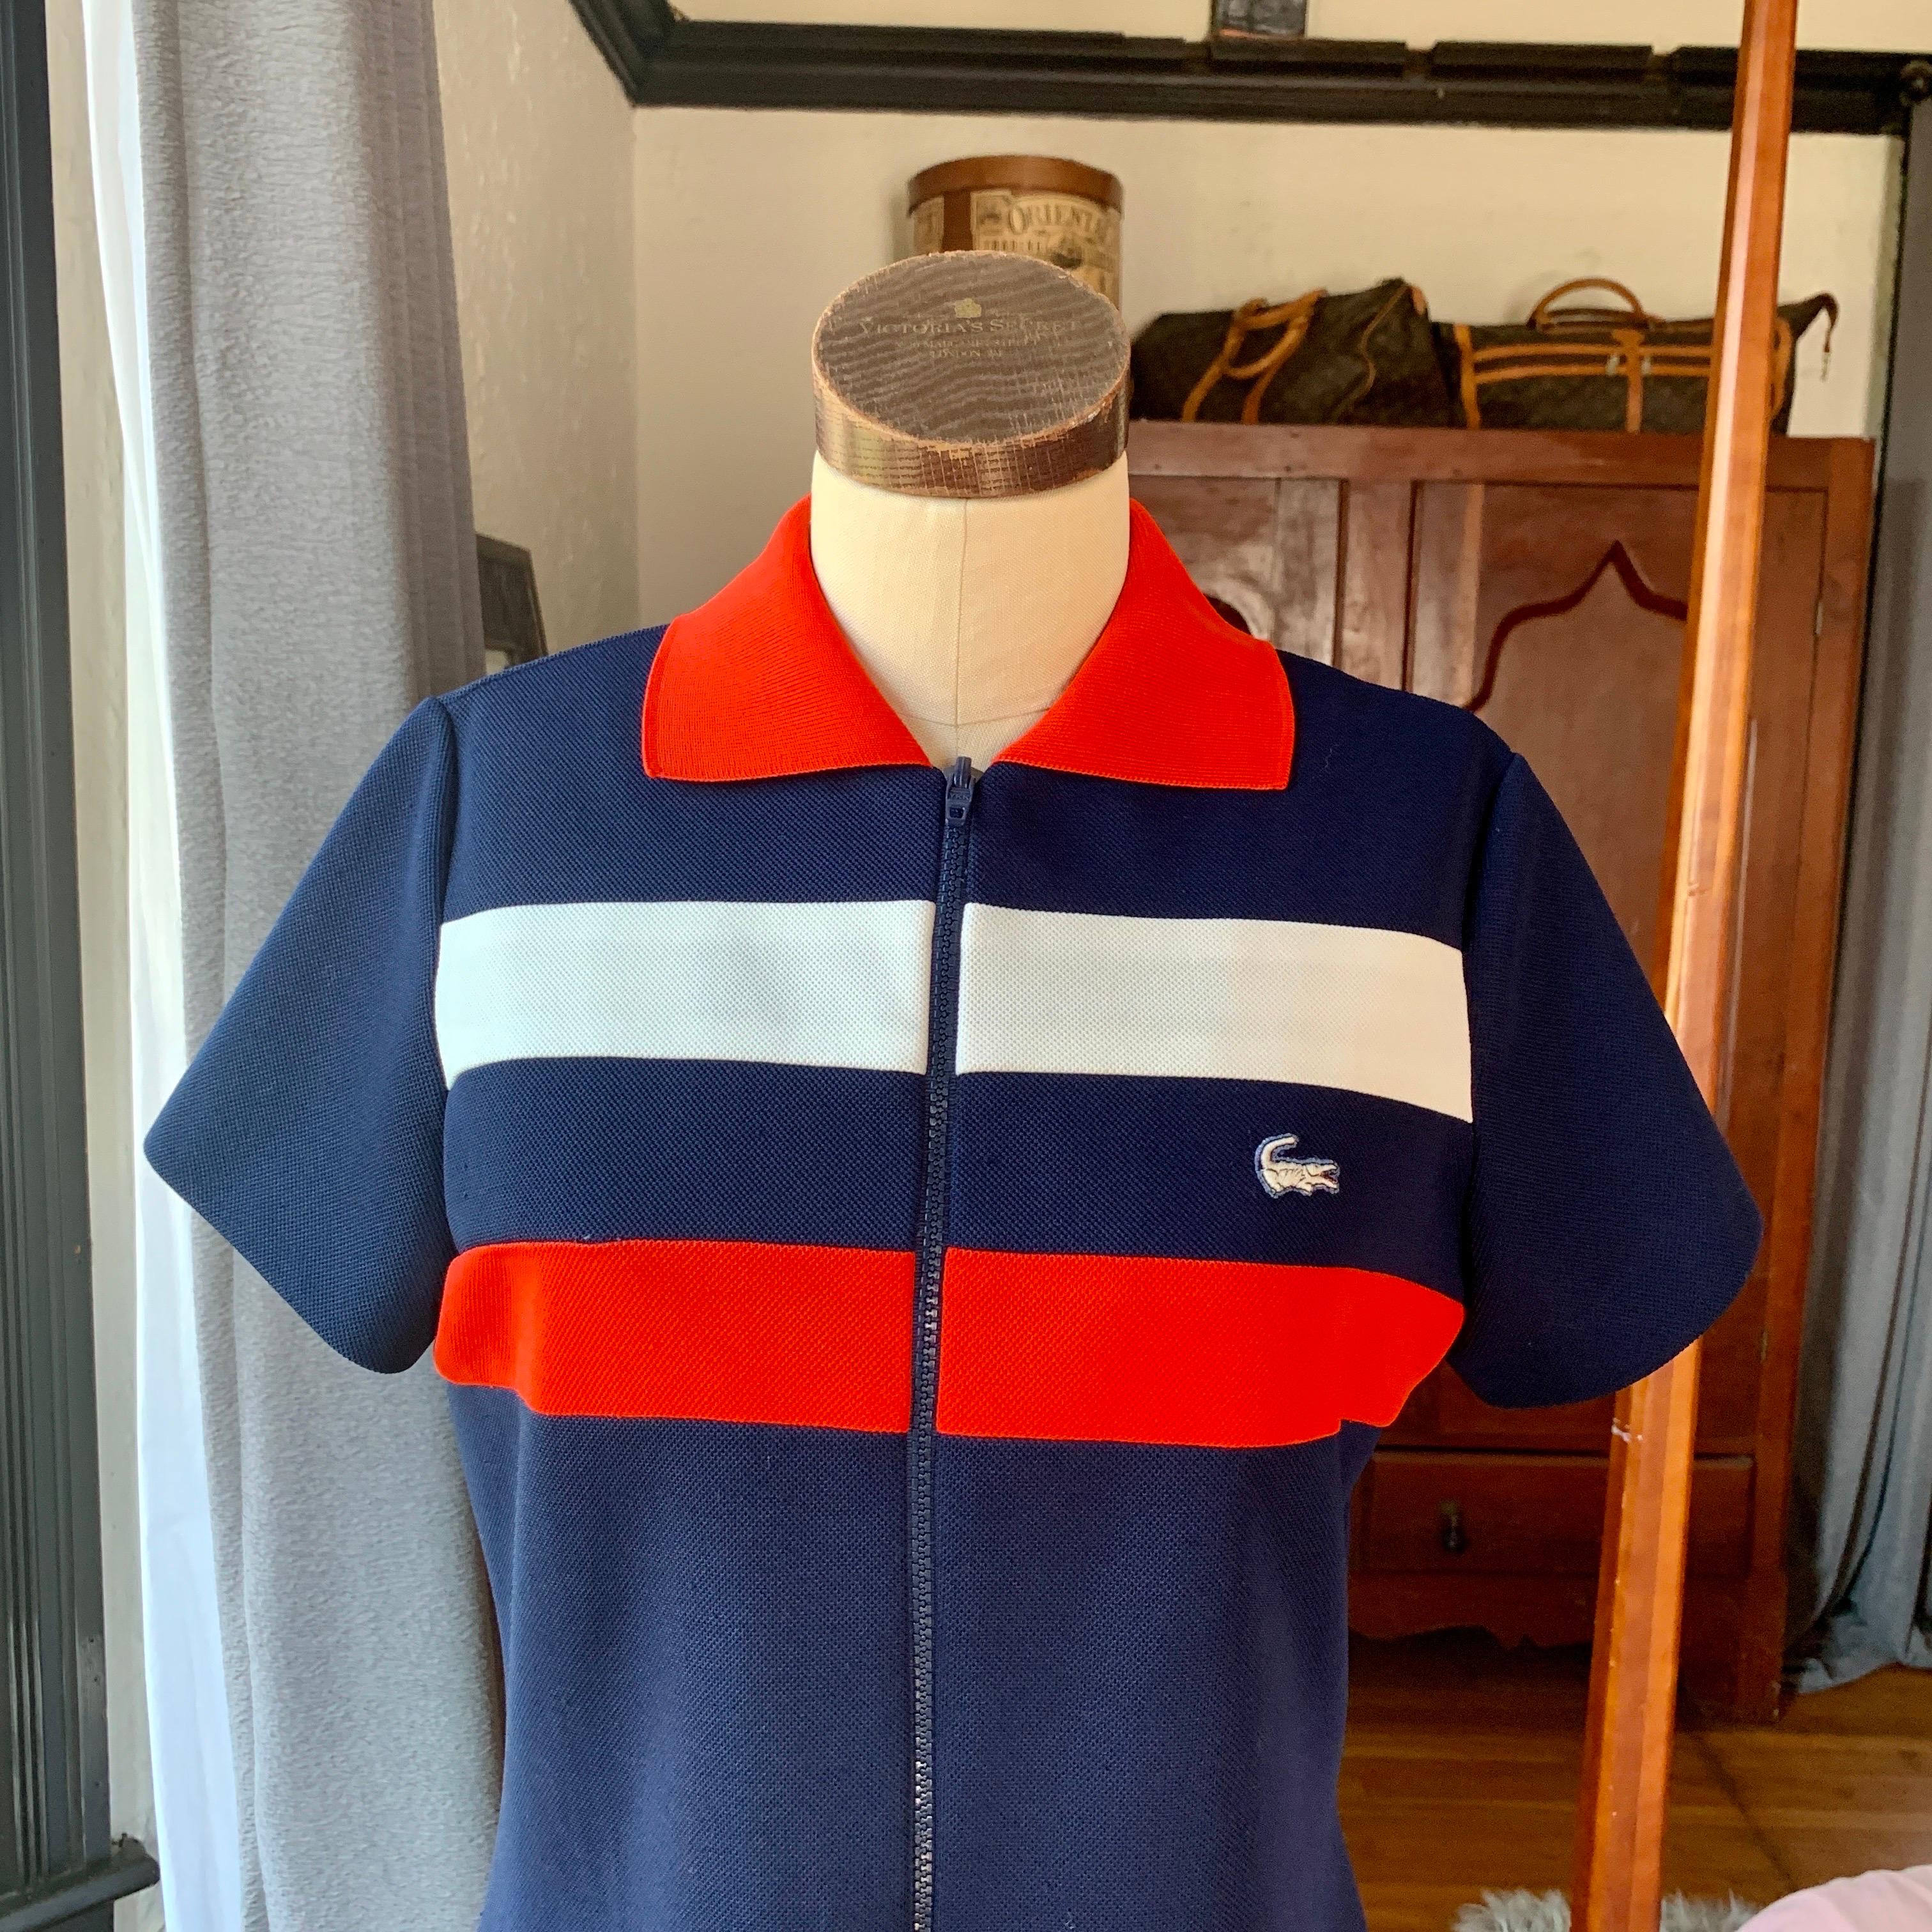 Lacoste, David Crystal, Blue Dress, Red and White Stripe, Iconic Alligator, Zipper Front, Polyester, No Size

Measurements Laying Flat (has stretch)
Bust 20